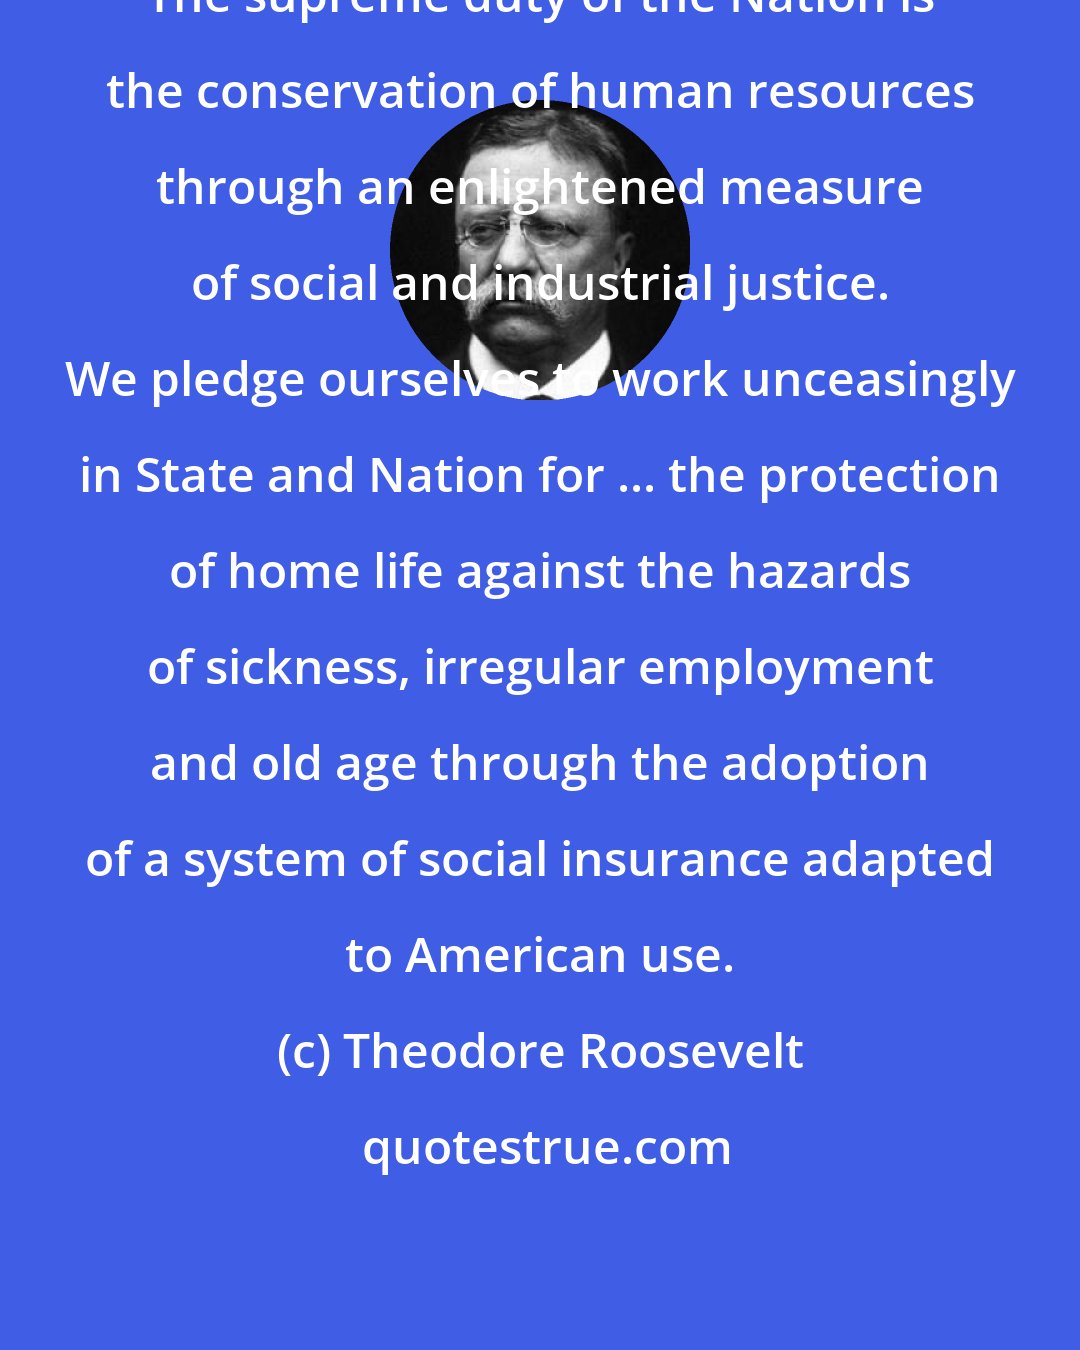 Theodore Roosevelt: The supreme duty of the Nation is the conservation of human resources through an enlightened measure of social and industrial justice. We pledge ourselves to work unceasingly in State and Nation for ... the protection of home life against the hazards of sickness, irregular employment and old age through the adoption of a system of social insurance adapted to American use.